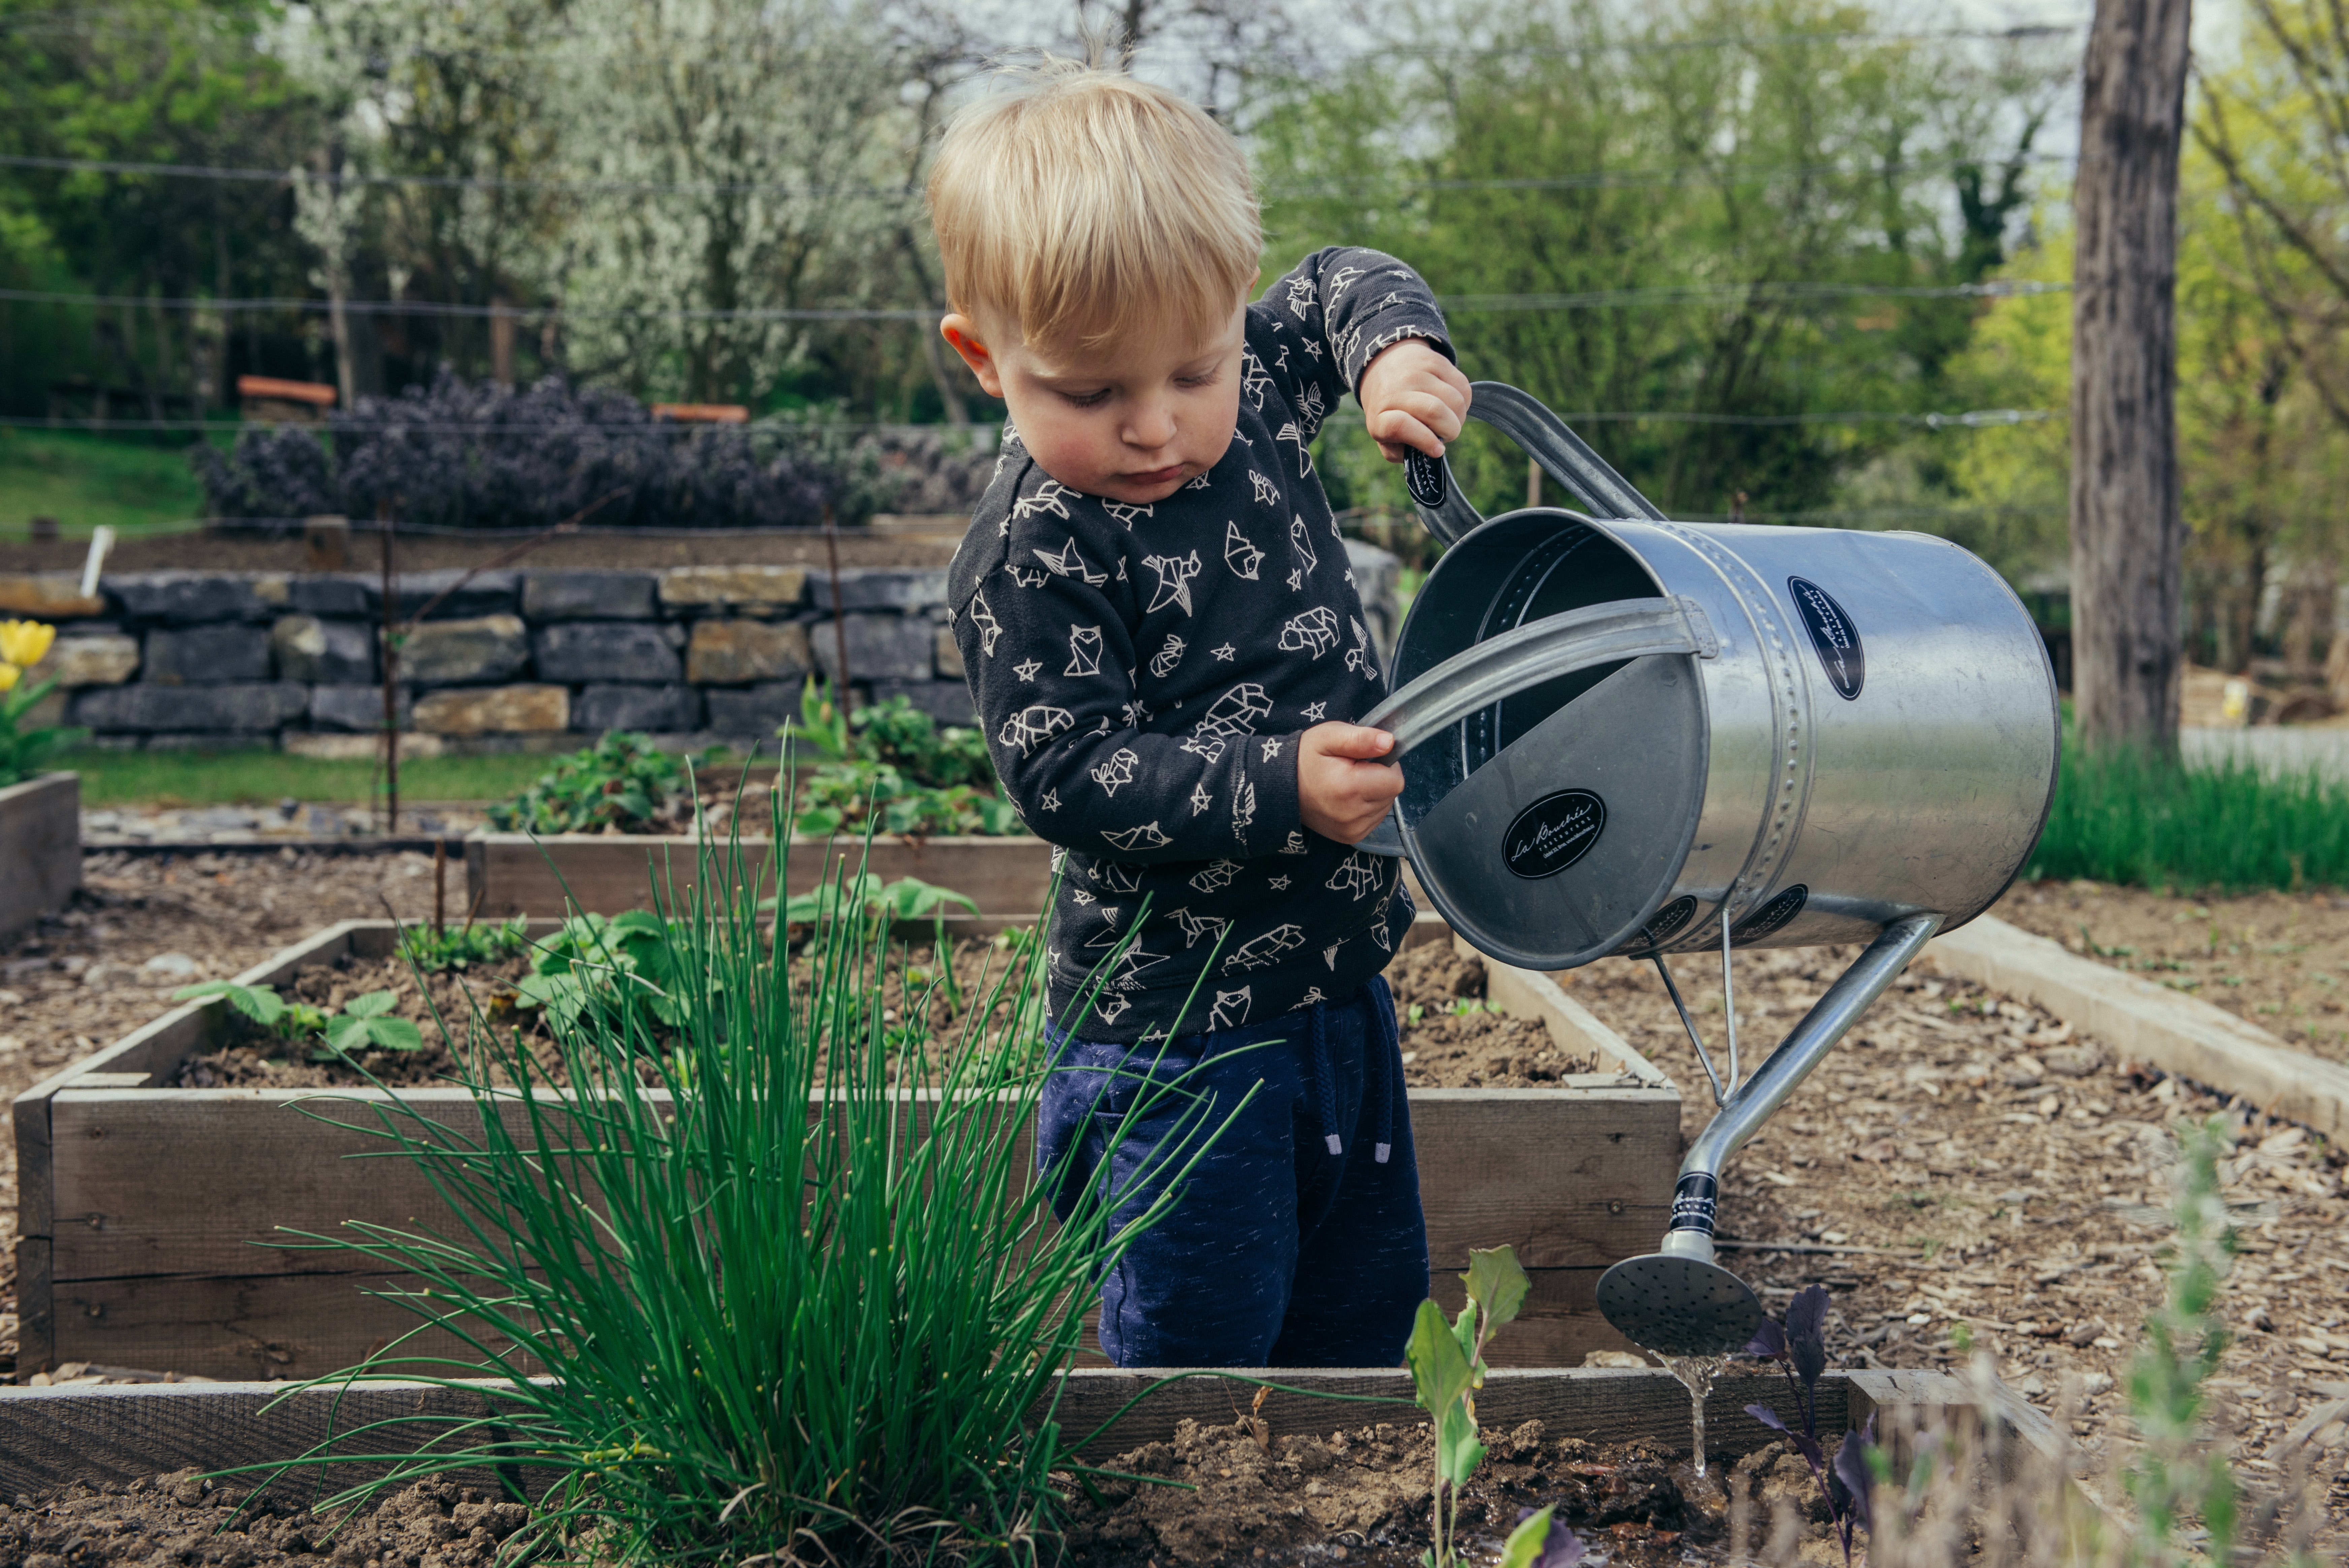 A young child using a large watering can on a trough of plants.